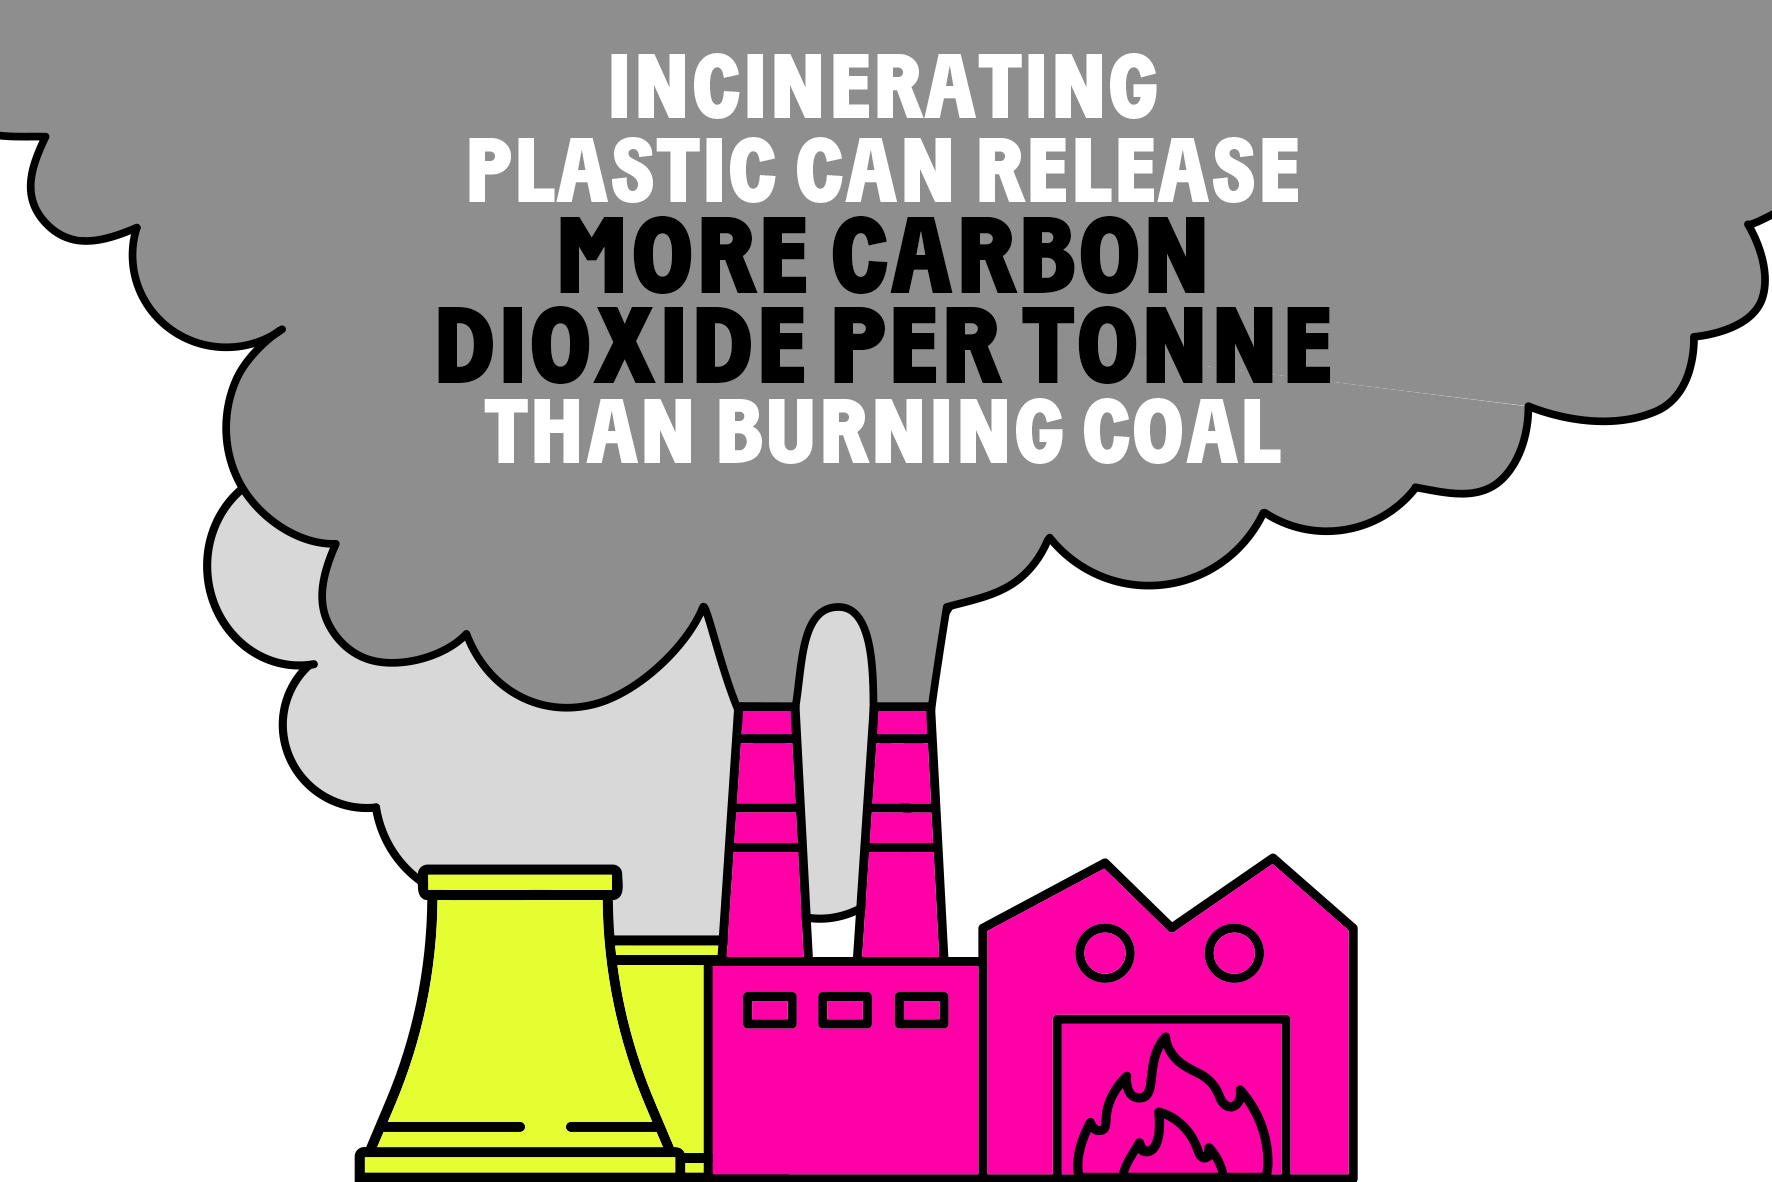 Incinerating plastic can release more carbon dioxide per tonne than burning coal